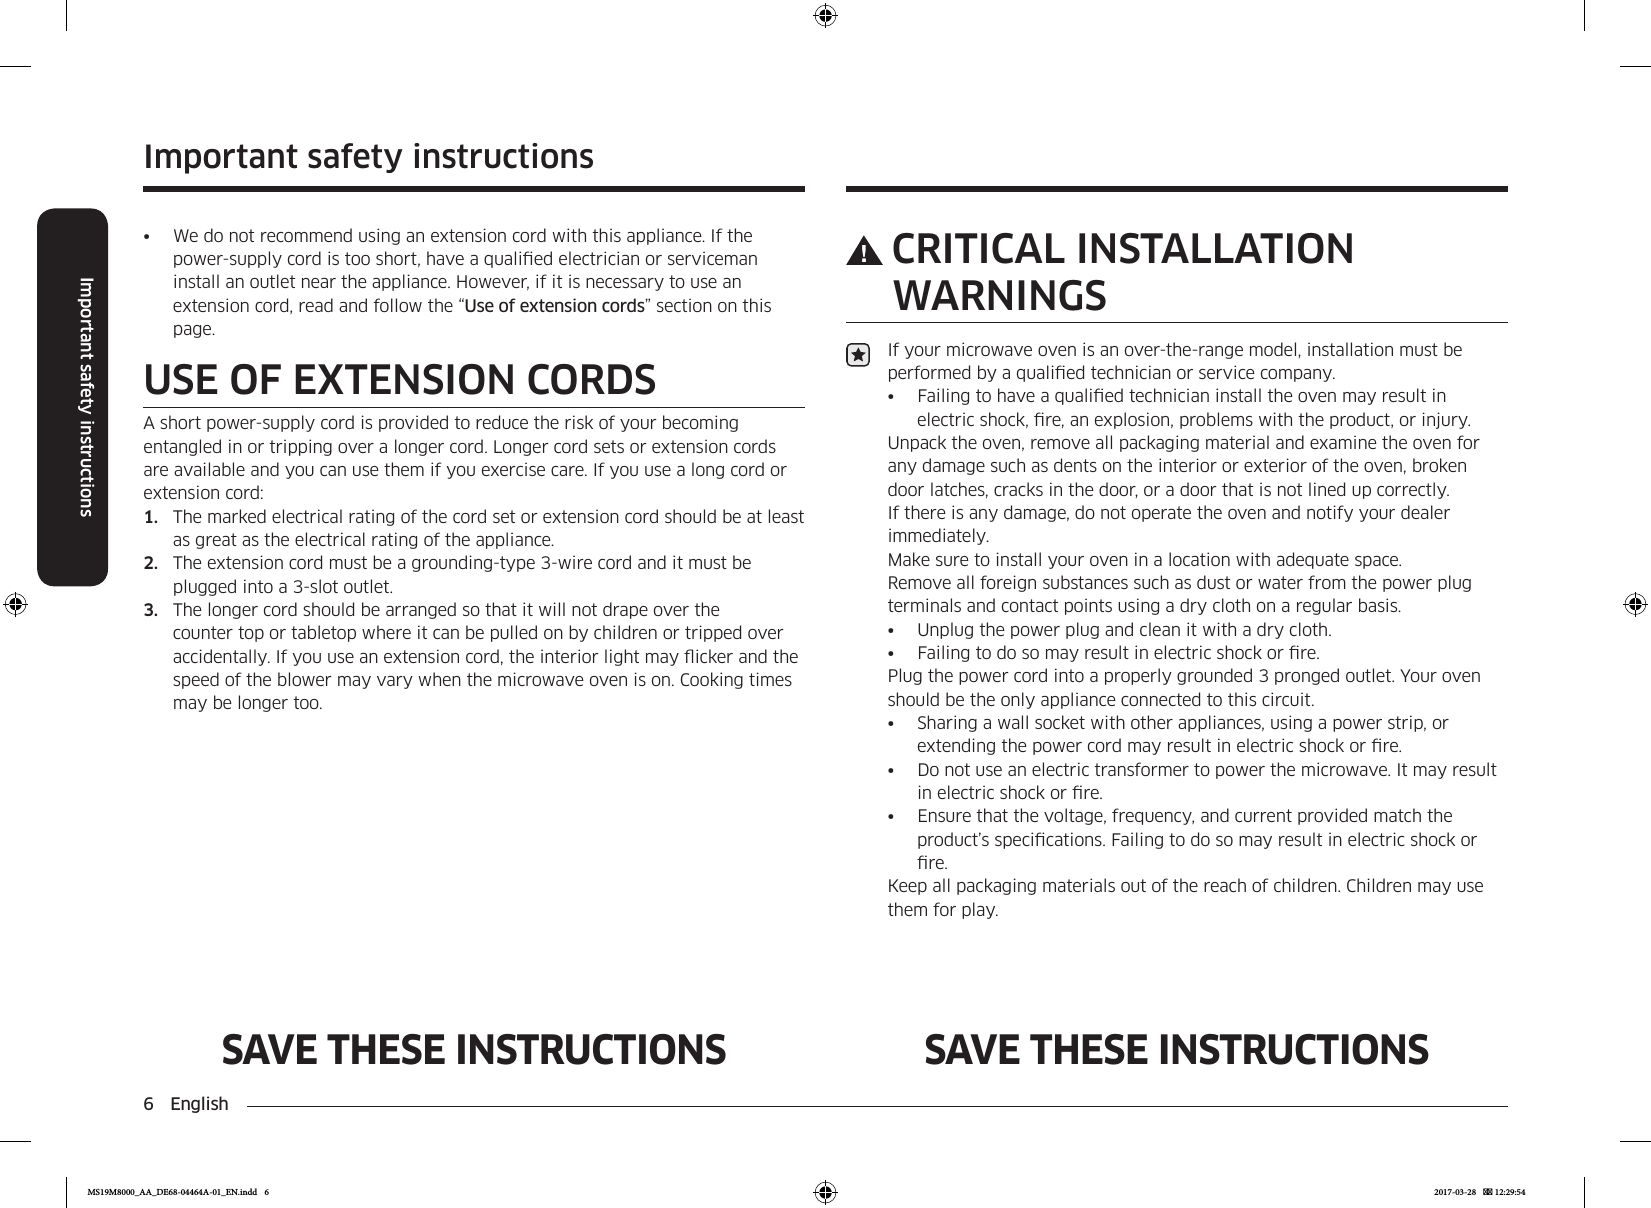 6  EnglishImportant safety instructionsImportant safety instructionsSAVE THESE INSTRUCTIONS SAVE THESE INSTRUCTIONSCRITICAL INSTALLATION WARNINGSIf your microwave oven is an over-the-range model, installation must be performed by a qualied technician or service company.•  Failing to have a qualied technician install the oven may result in electric shock, re, an explosion, problems with the product, or injury.Unpack the oven, remove all packaging material and examine the oven for any damage such as dents on the interior or exterior of the oven, broken door latches, cracks in the door, or a door that is not lined up correctly. If there is any damage, do not operate the oven and notify your dealer immediately.Make sure to install your oven in a location with adequate space. Remove all foreign substances such as dust or water from the power plug terminals and contact points using a dry cloth on a regular basis.•  Unplug the power plug and clean it with a dry cloth.•  Failing to do so may result in electric shock or re.Plug the power cord into a properly grounded 3 pronged outlet. Your oven should be the only appliance connected to this circuit.•  Sharing a wall socket with other appliances, using a power strip, or extending the power cord may result in electric shock or re.•  Do not use an electric transformer to power the microwave. It may result in electric shock or re.•  Ensure that the voltage, frequency, and current provided match the product’s specications. Failing to do so may result in electric shock or re.Keep all packaging materials out of the reach of children. Children may use them for play.•  We do not recommend using an extension cord with this appliance. If the power-supply cord is too short, have a qualied electrician or serviceman install an outlet near the appliance. However, if it is necessary to use an extension cord, read and follow the “Use of extension cords” section on this page.USE OF EXTENSION CORDSA short power-supply cord is provided to reduce the risk of your becoming entangled in or tripping over a longer cord. Longer cord sets or extension cords are available and you can use them if you exercise care. If you use a long cord or extension cord:1.  The marked electrical rating of the cord set or extension cord should be at least as great as the electrical rating of the appliance.2.  The extension cord must be a grounding-type 3-wire cord and it must be plugged into a 3-slot outlet.3.  The longer cord should be arranged so that it will not drape over the counter top or tabletop where it can be pulled on by children or tripped over accidentally. If you use an extension cord, the interior light may icker and the speed of the blower may vary when the microwave oven is on. Cooking times may be longer too.MS19M8000_AA_DE68-04464A-01_EN.indd   6 2017-03-28    12:29:54